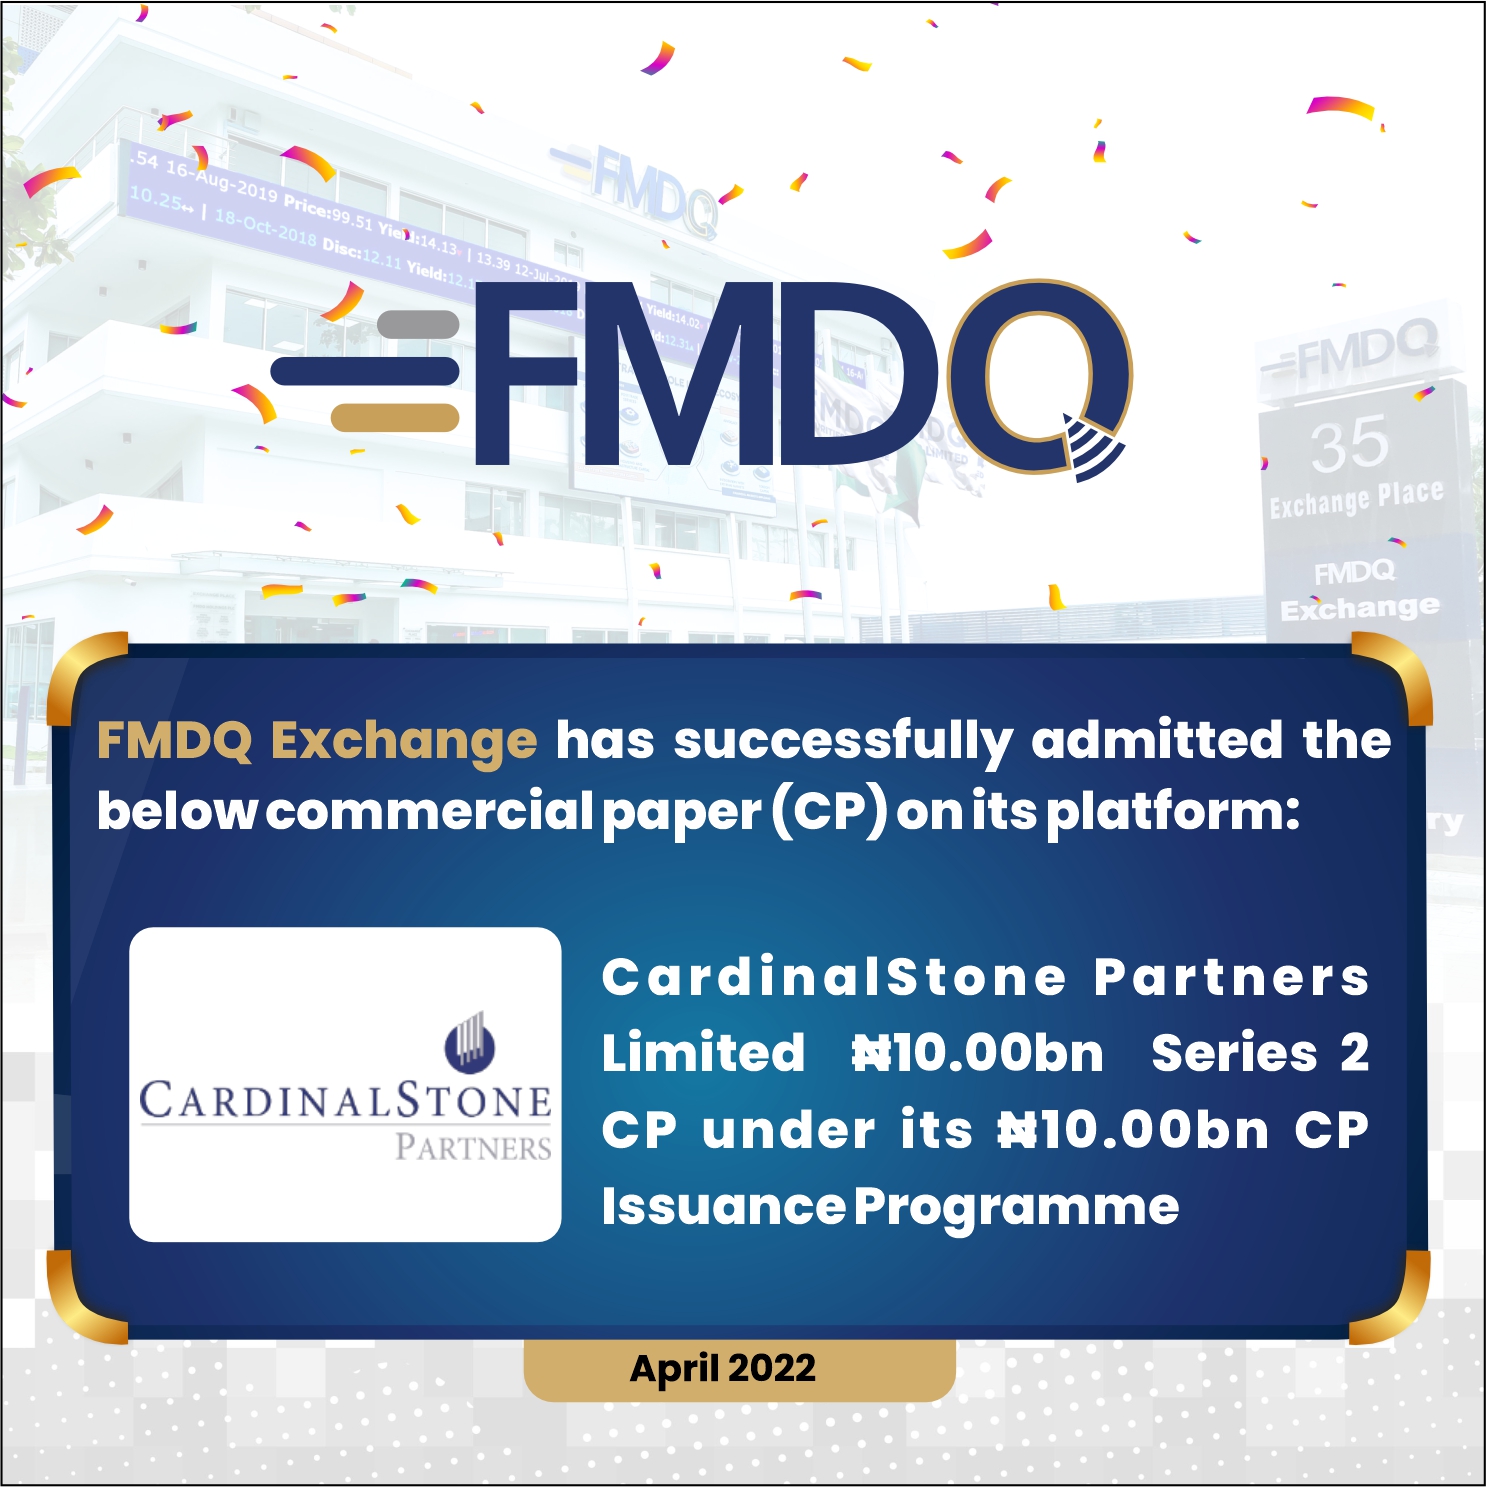 cardinalstone-partners-limited-joins-other-corporates-to-quote-commercial-paper-on-fmdq-exchange